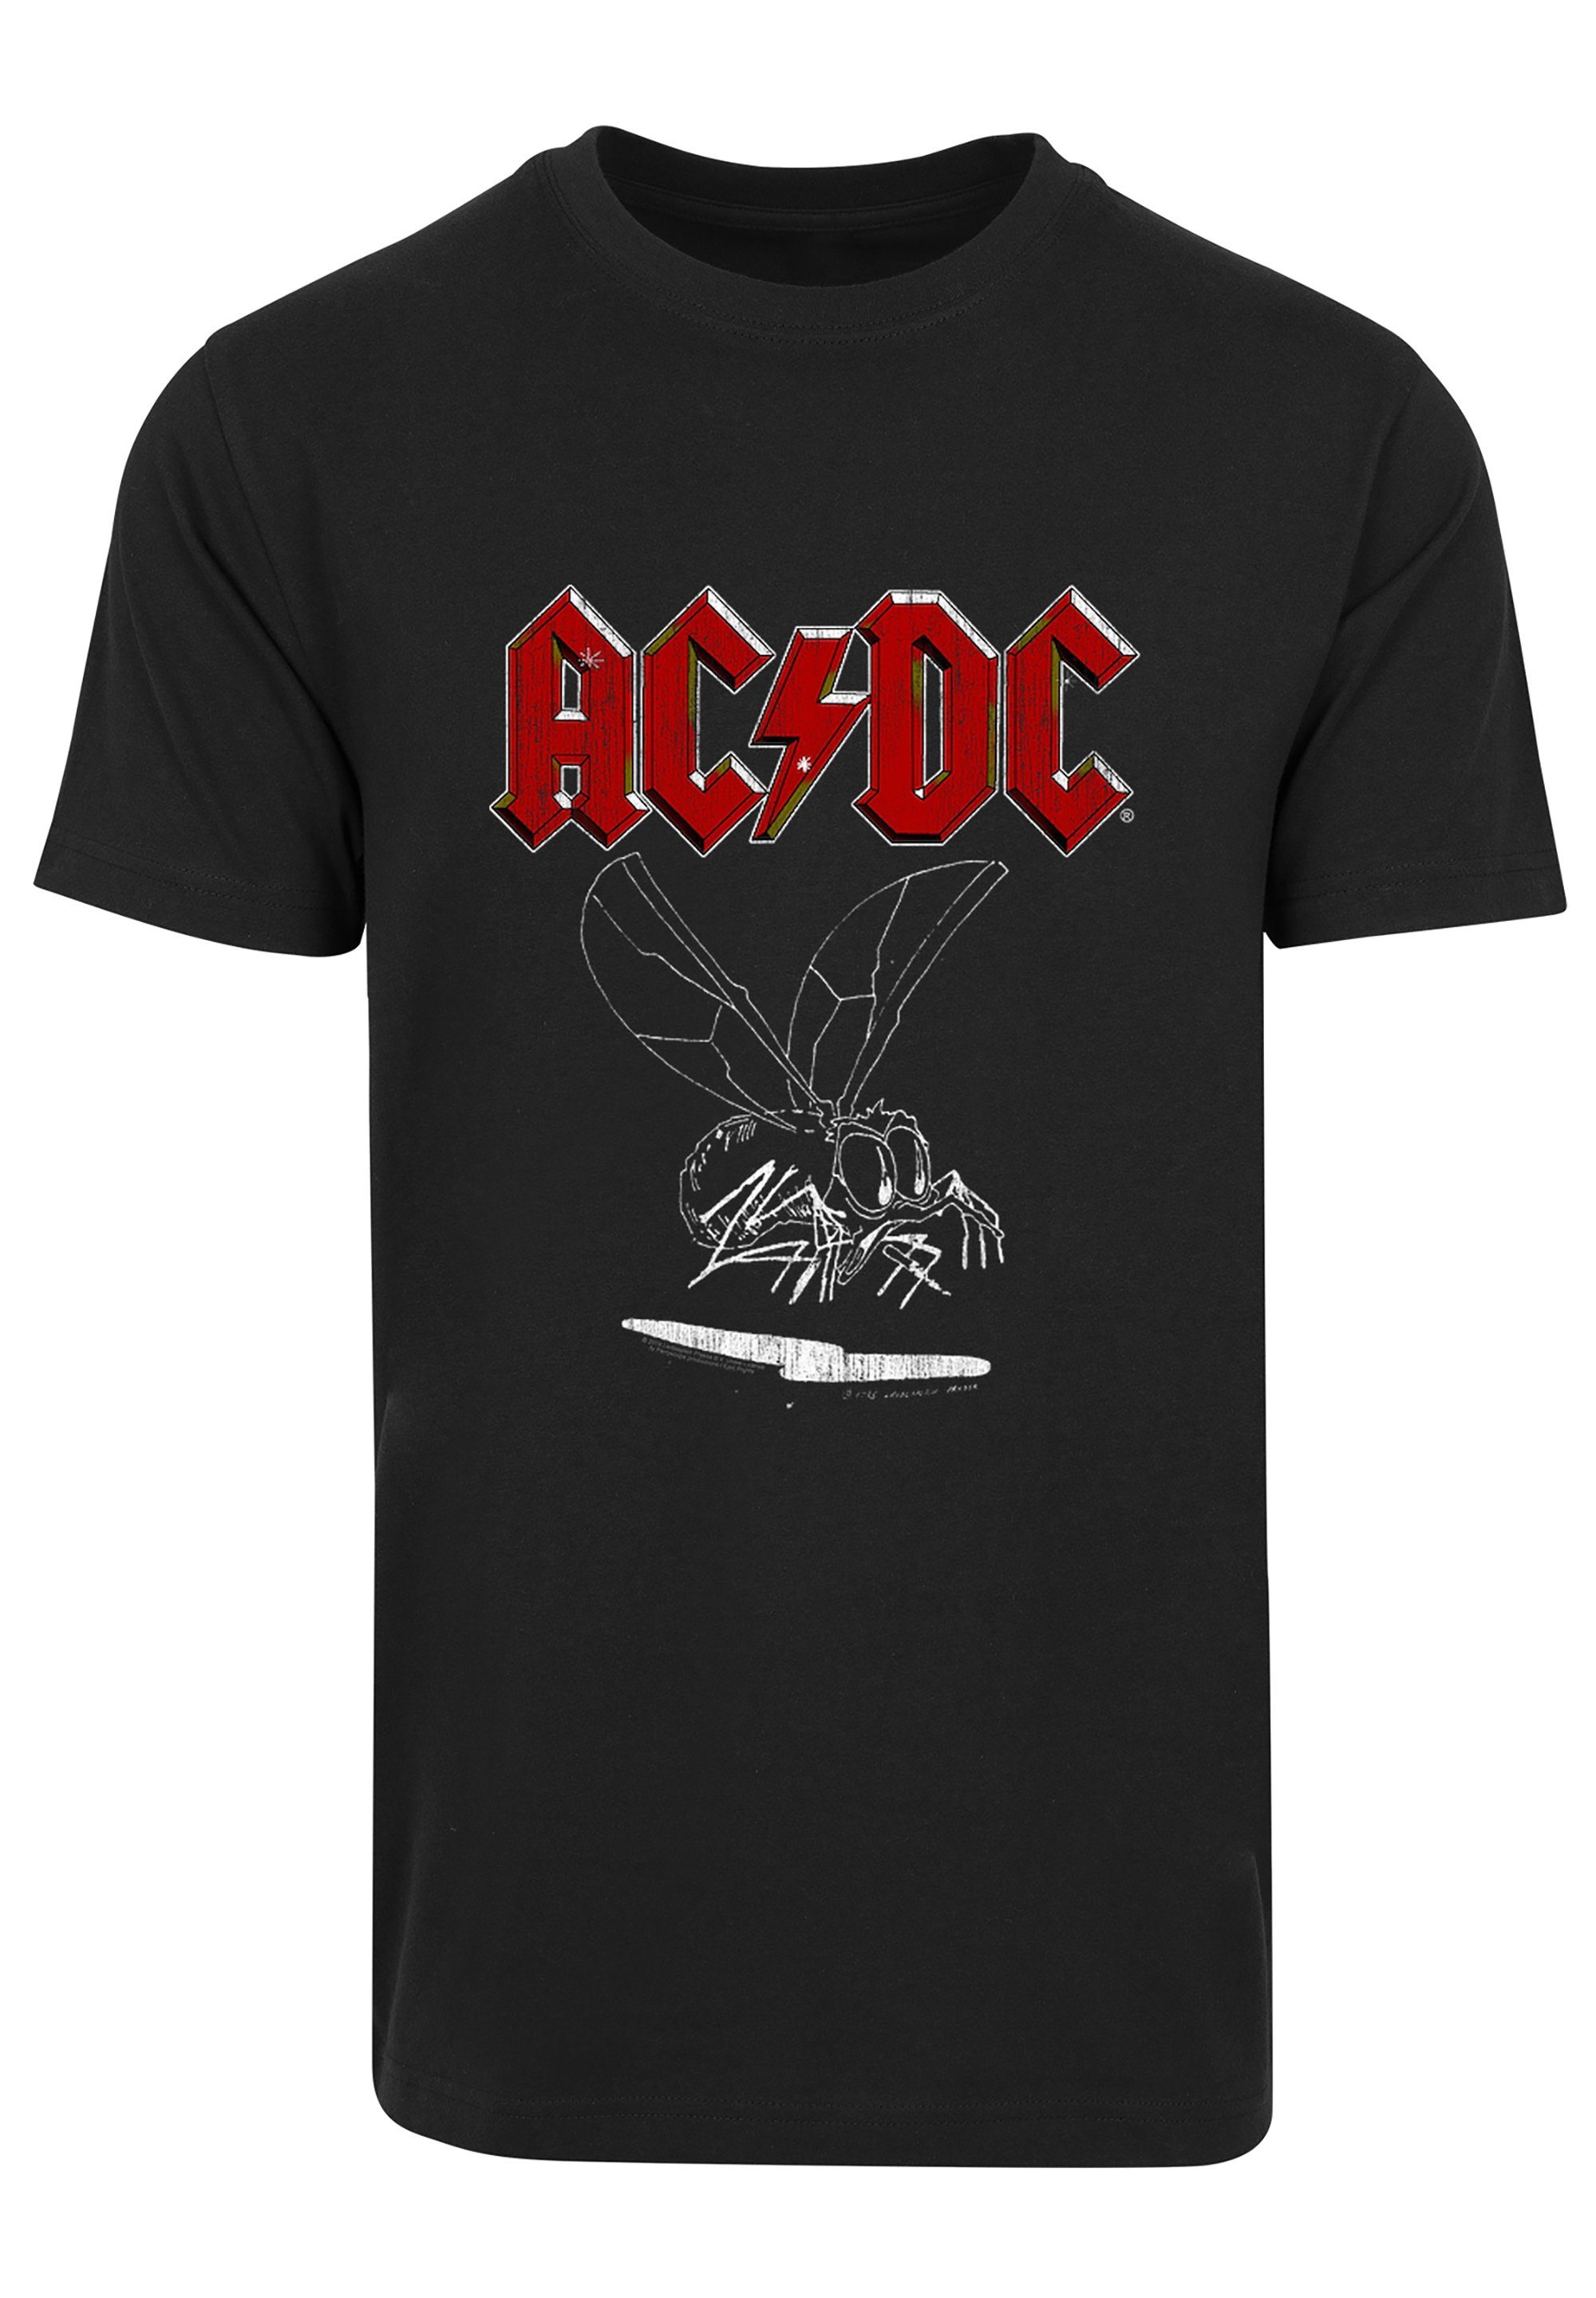 & On Print The Wall 1985 für Fly Herren Kinder ACDC F4NT4STIC T-Shirt